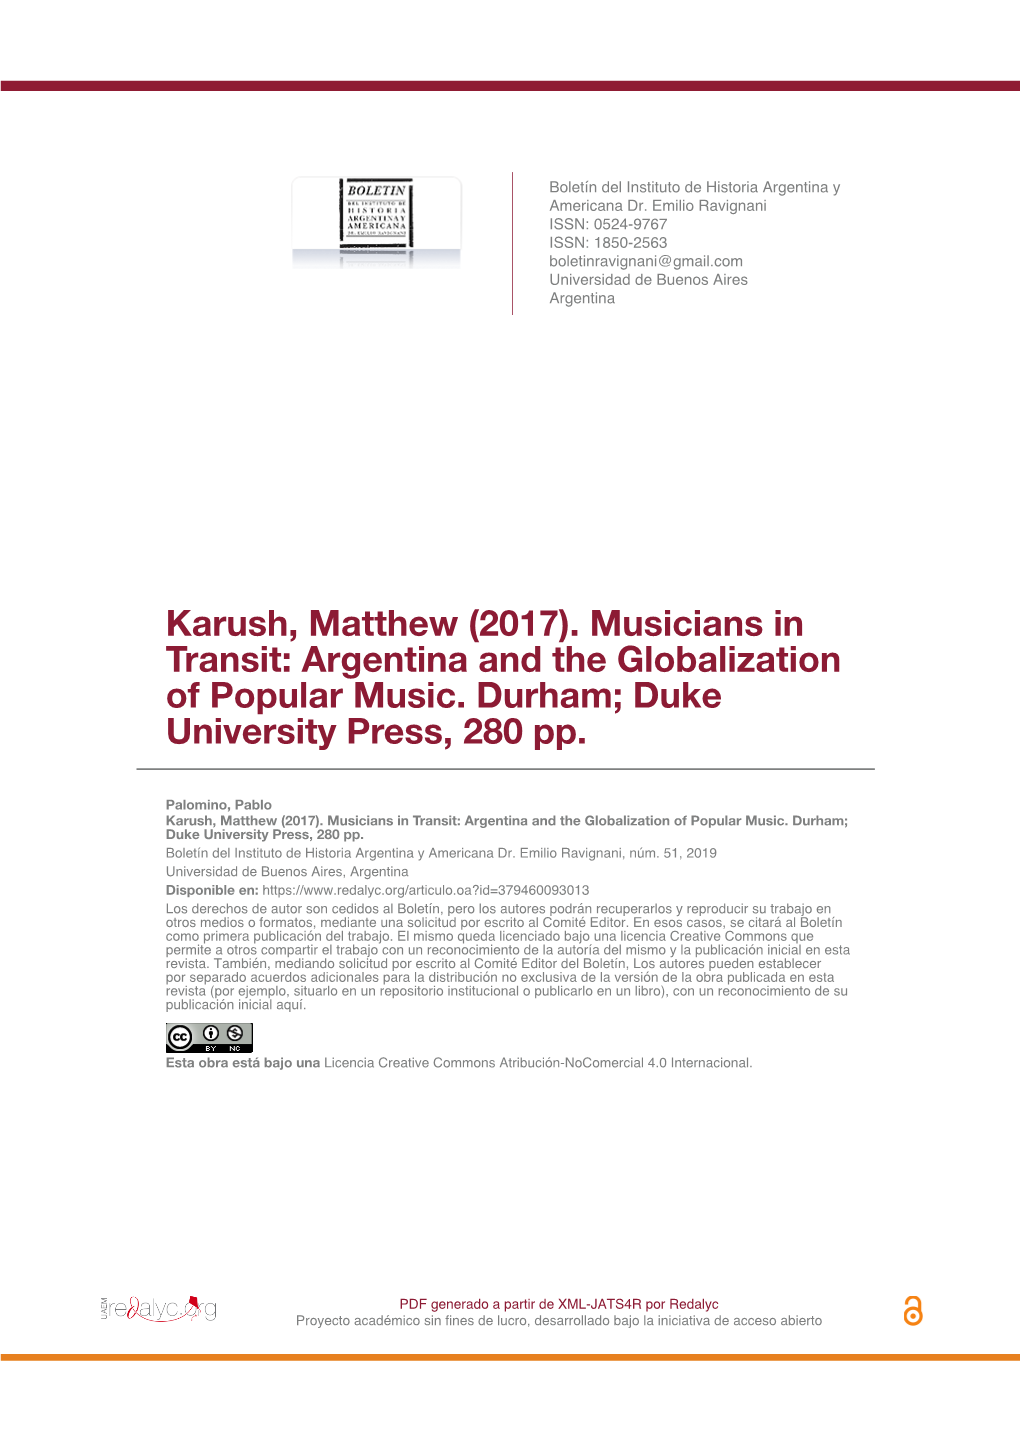 Karush, Matthew (2017). Musicians in Transit: Argentina and the Globalization of Popular Music